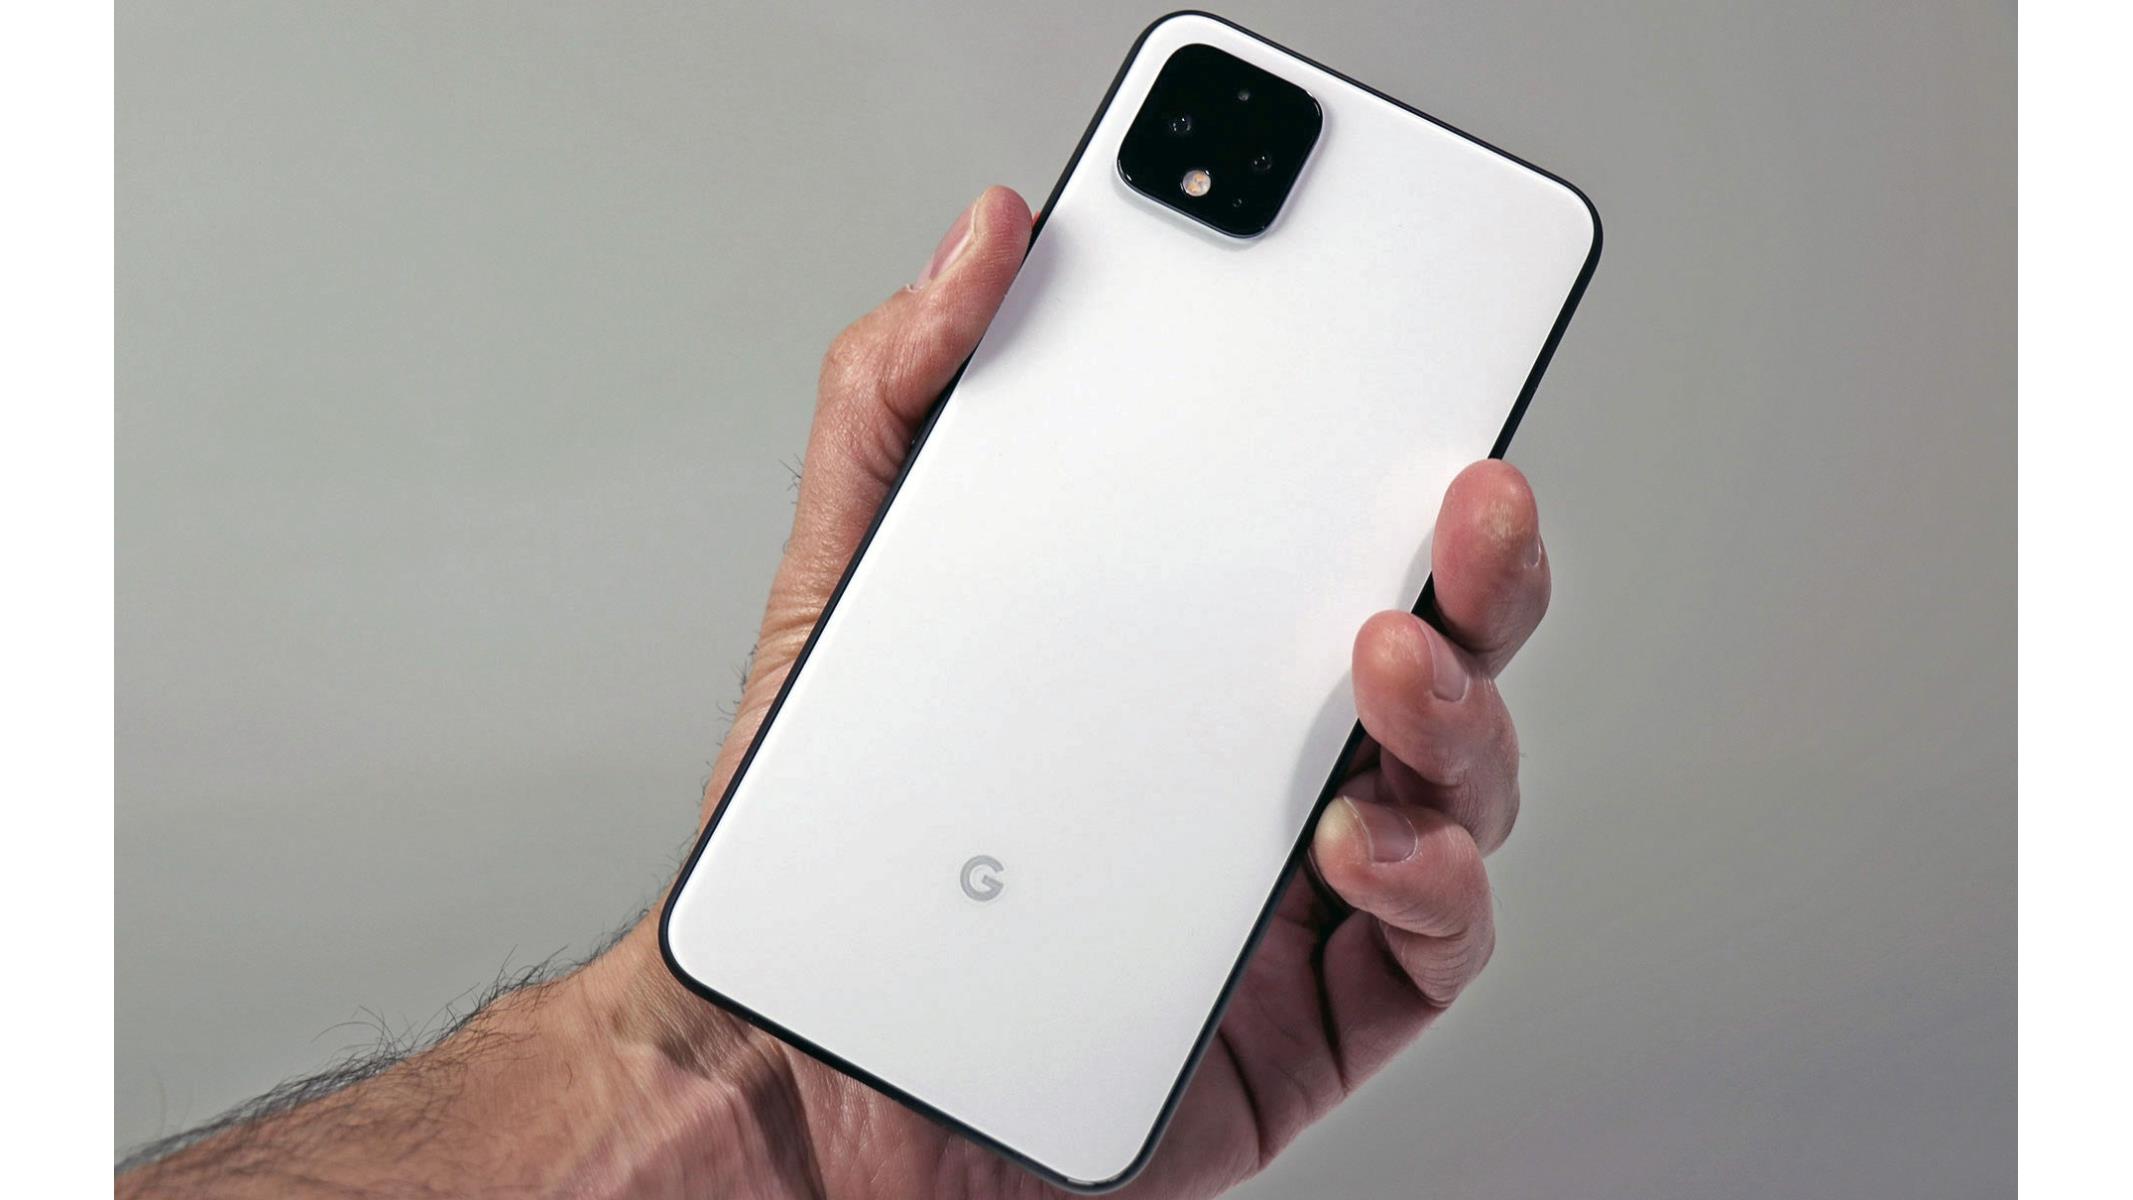 Google Pixel 4 XL Review: Streaks Of Brilliance, Pure Android